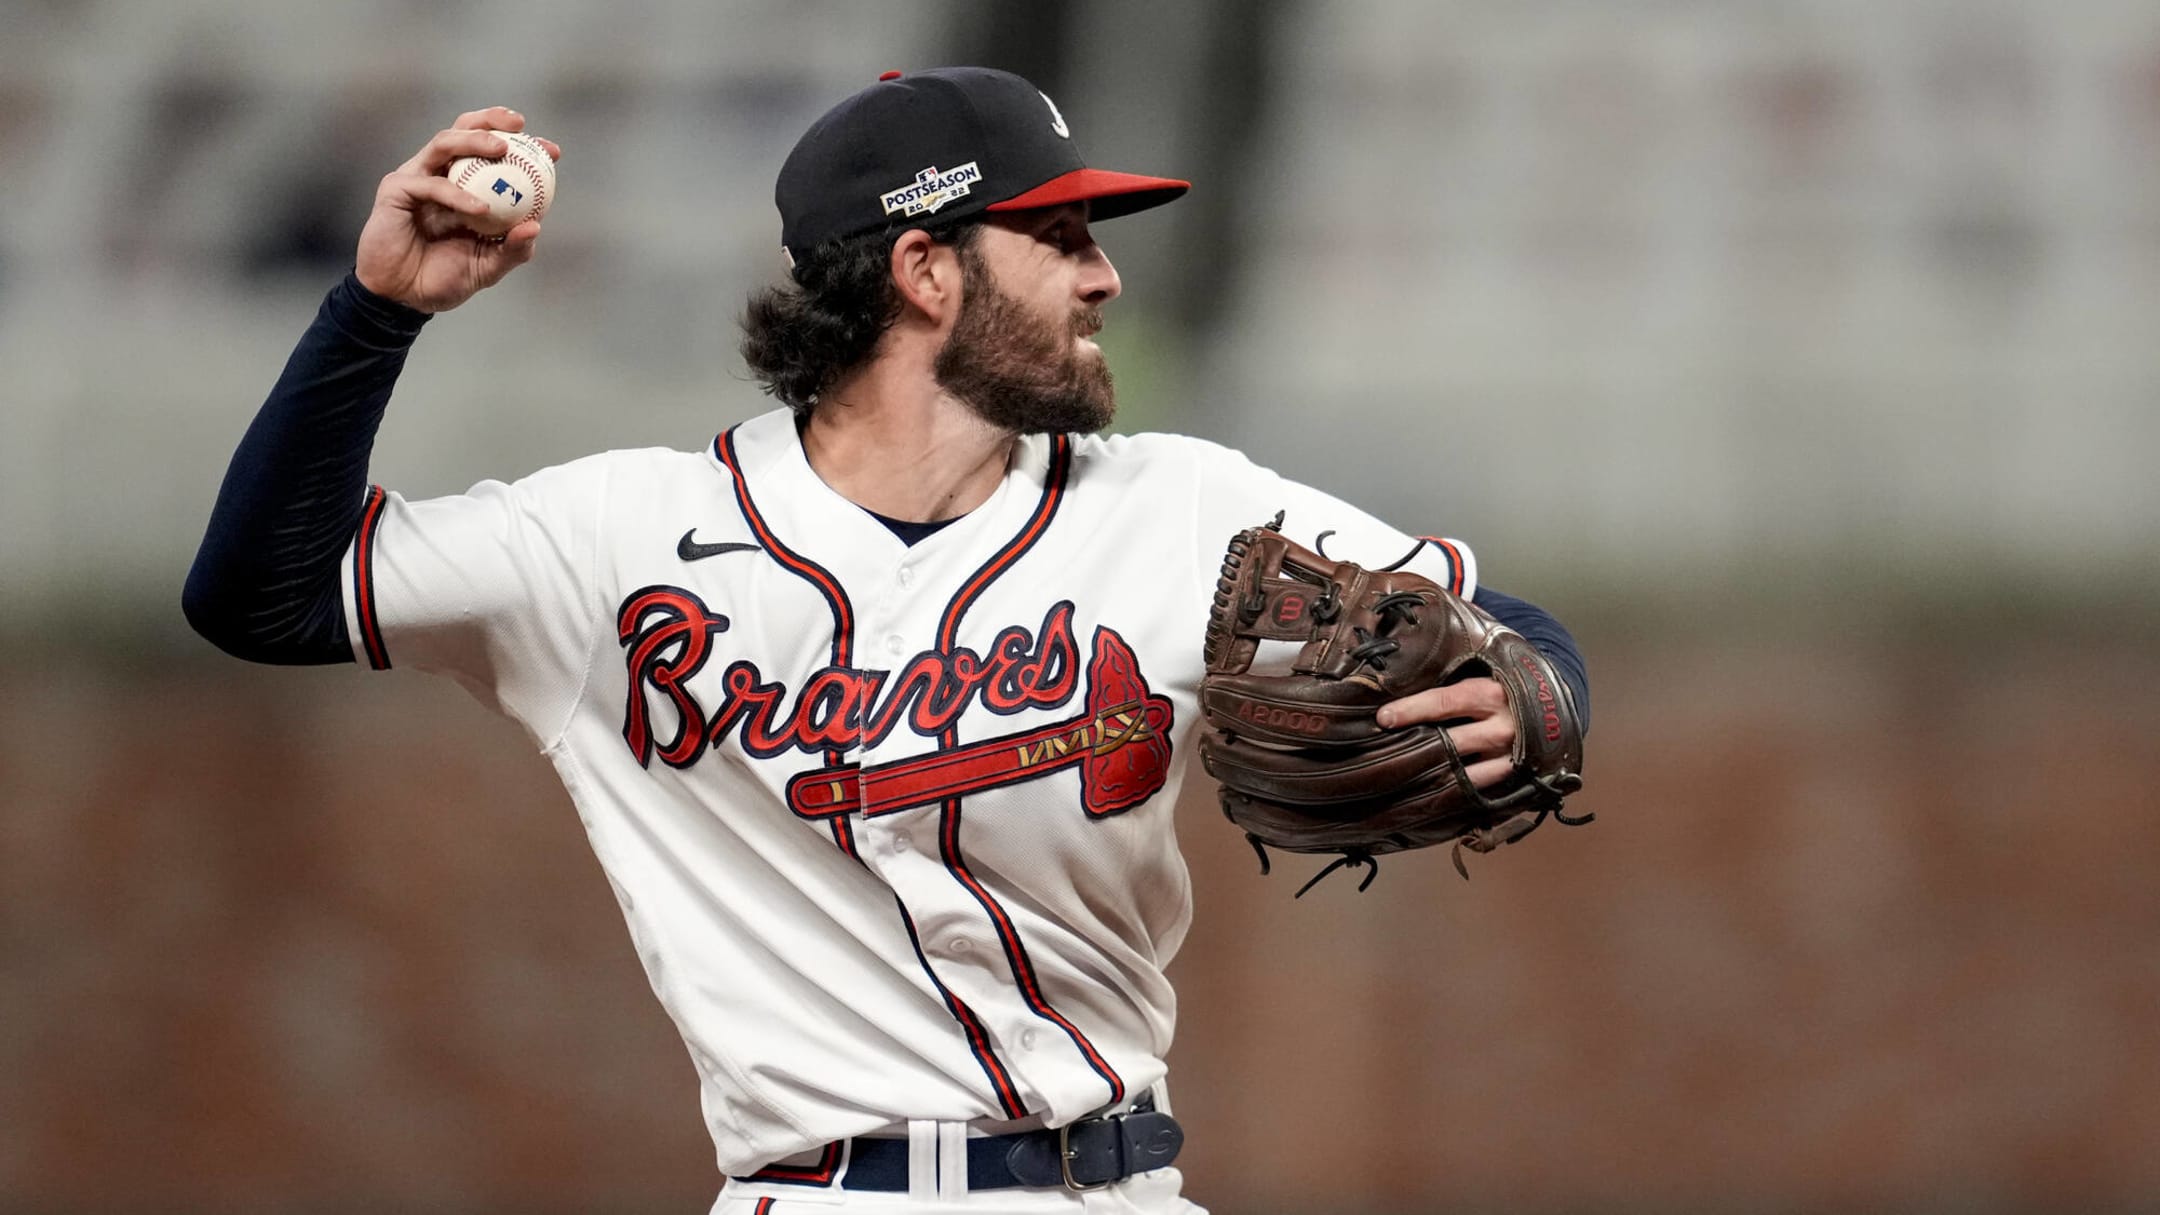 The Braves are back and so is their soft serve machine - Axios Atlanta